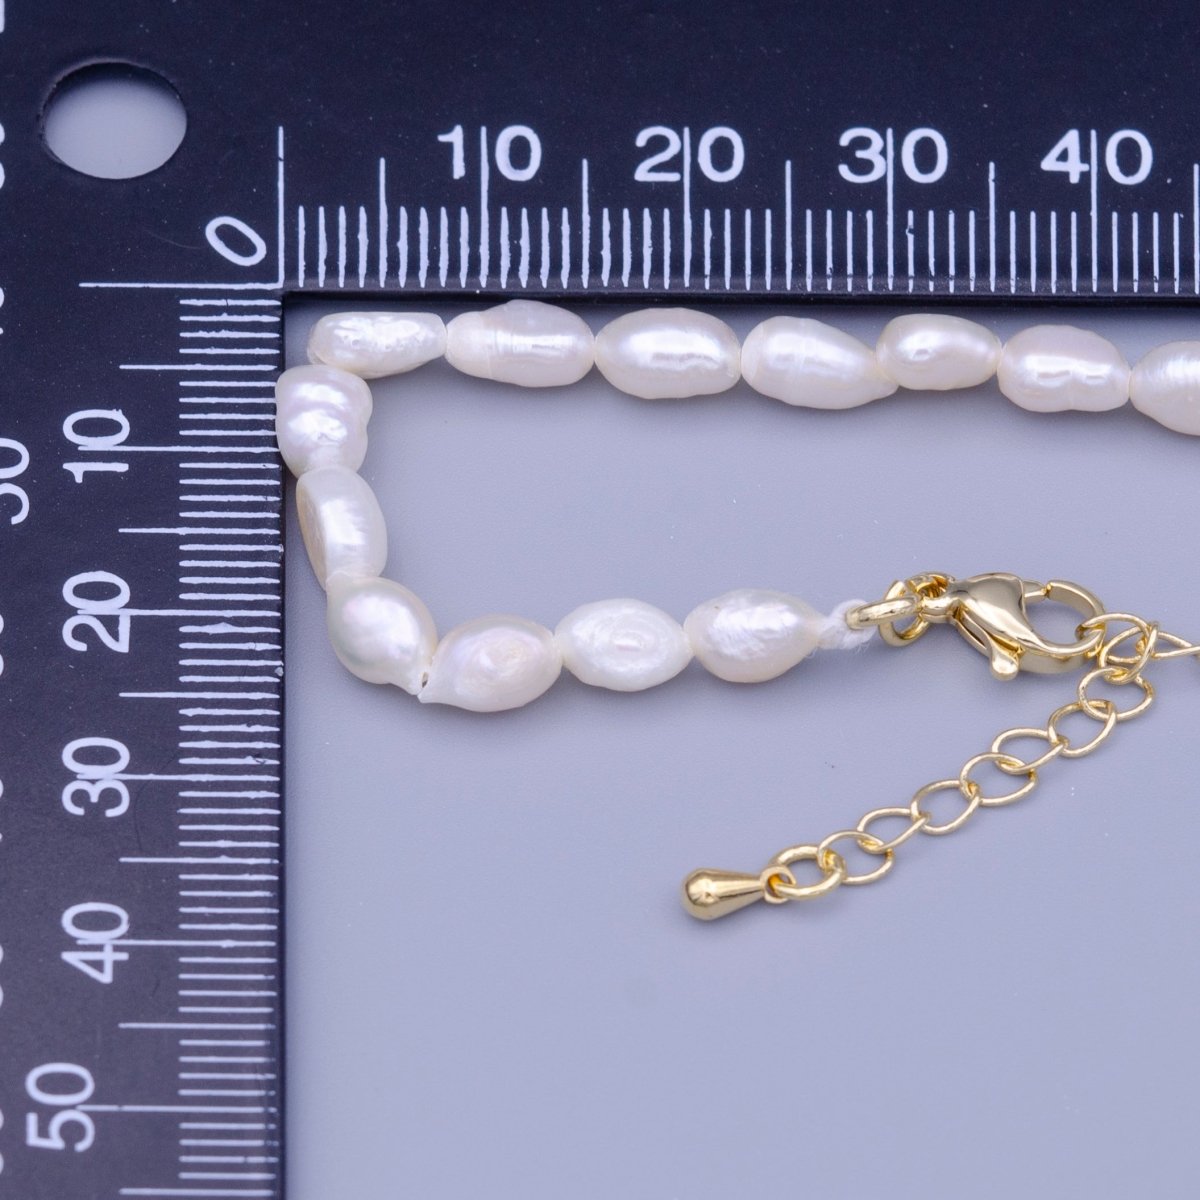 6mm Natural White Freshwater Pearl 14 Inch Minimalist Choker Necklace | WA-1465 Clearance Pricing - DLUXCA